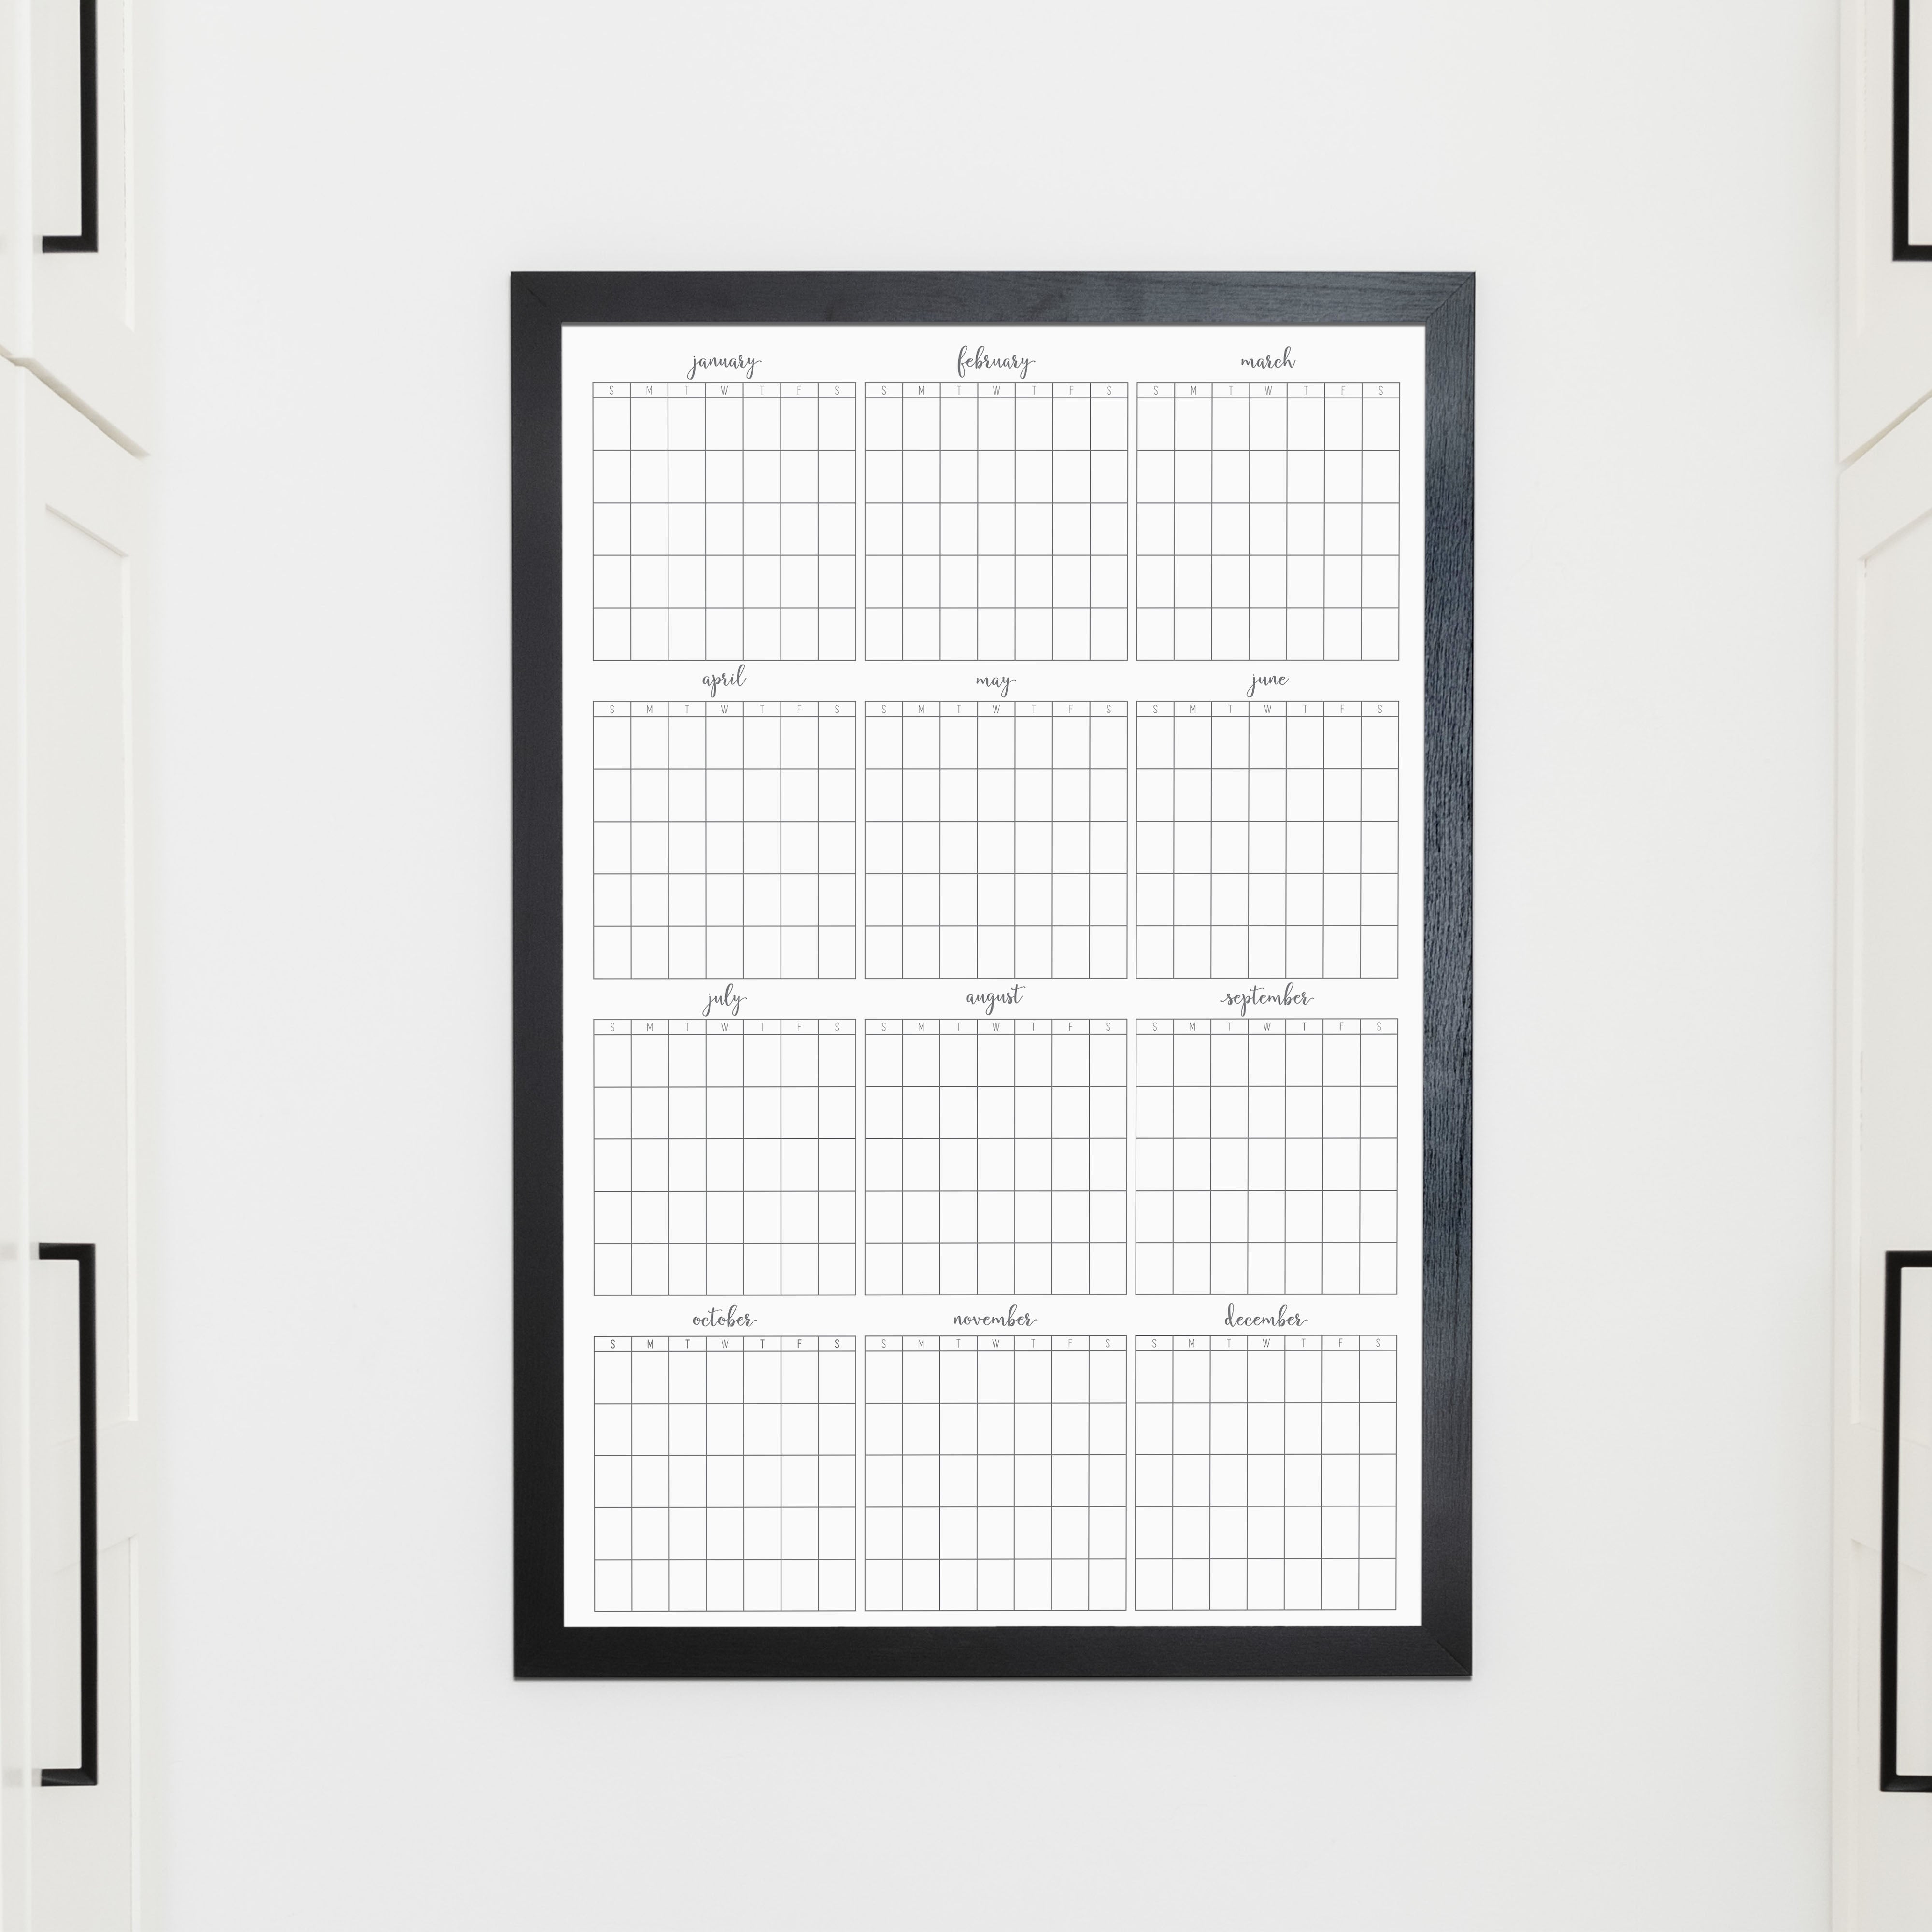 A framed whiteboard yearly calendar hanging up on the wall